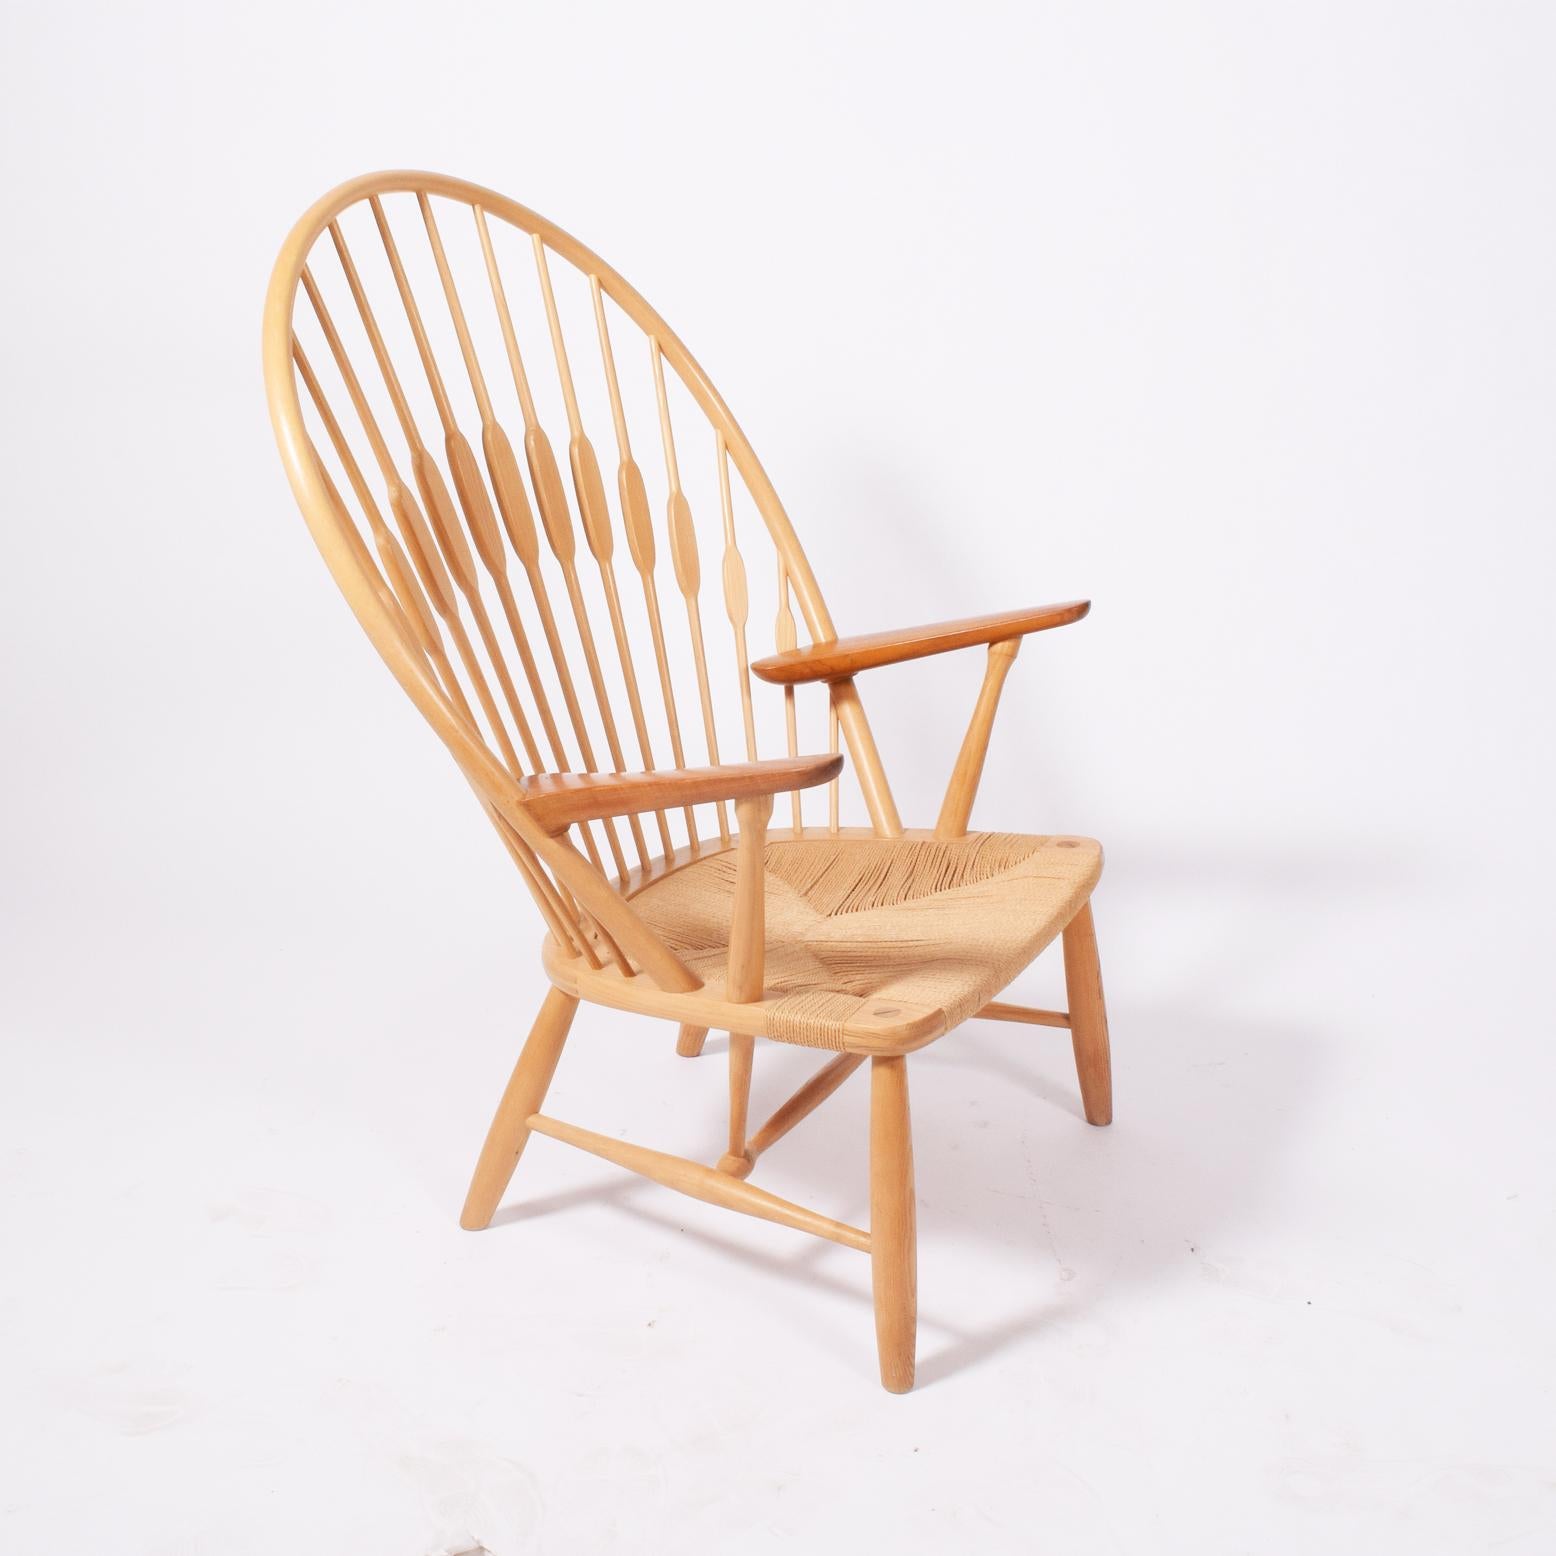 Solid ash back frame and spindles, solid teak arms on Danish woven papercord seat. Solid tapering legs. Marked on frame with manufacturer's mark. Made by Johannes Hansen. Designed 1947, this example, circa 1970s.